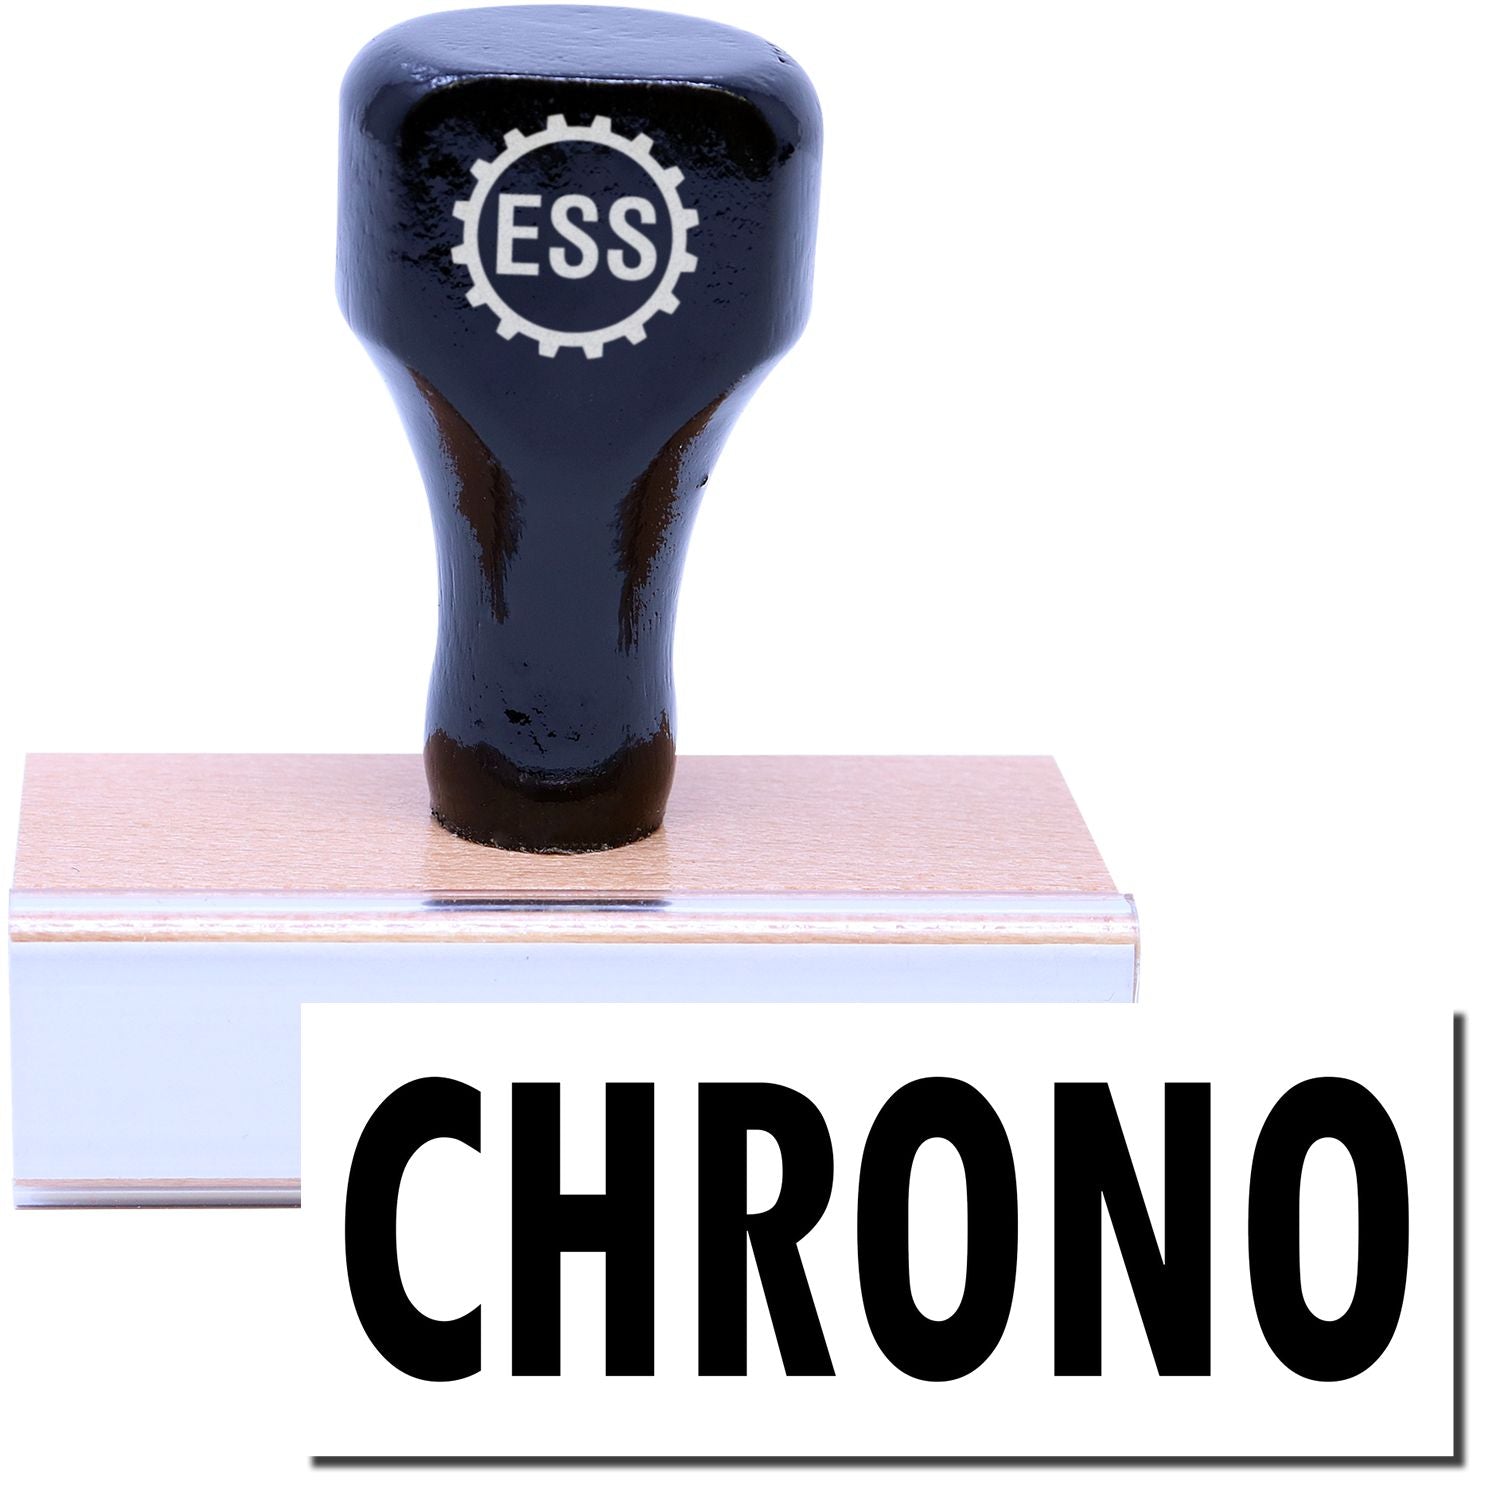 A stock office rubber stamp with a stamped image showing how the text "CHRONO" in a large font is displayed after stamping.